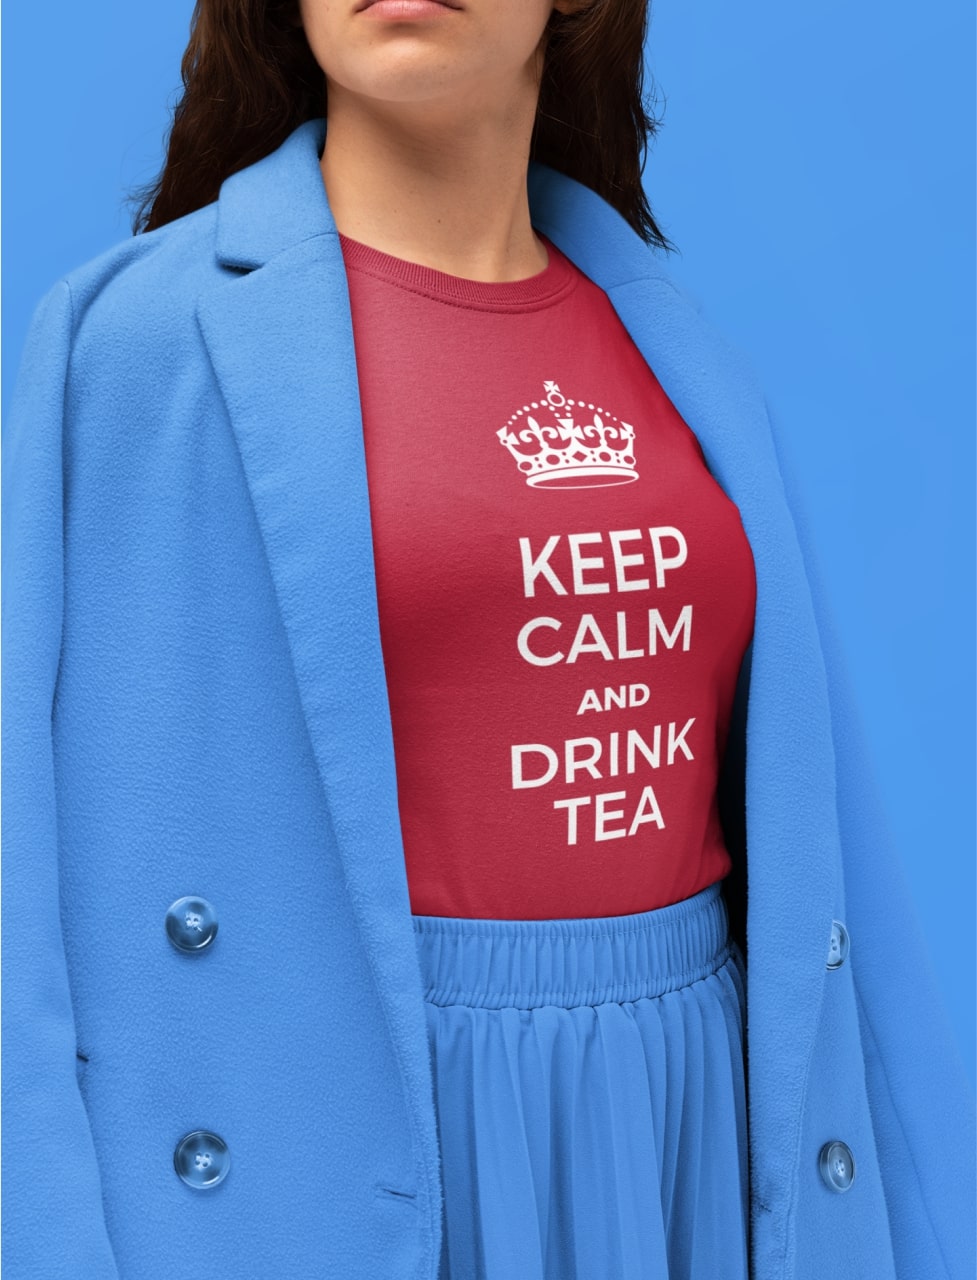 A woman wearing blue skirt, blue blazer, and a red t-shirt that says "Keep calm and drink tea"